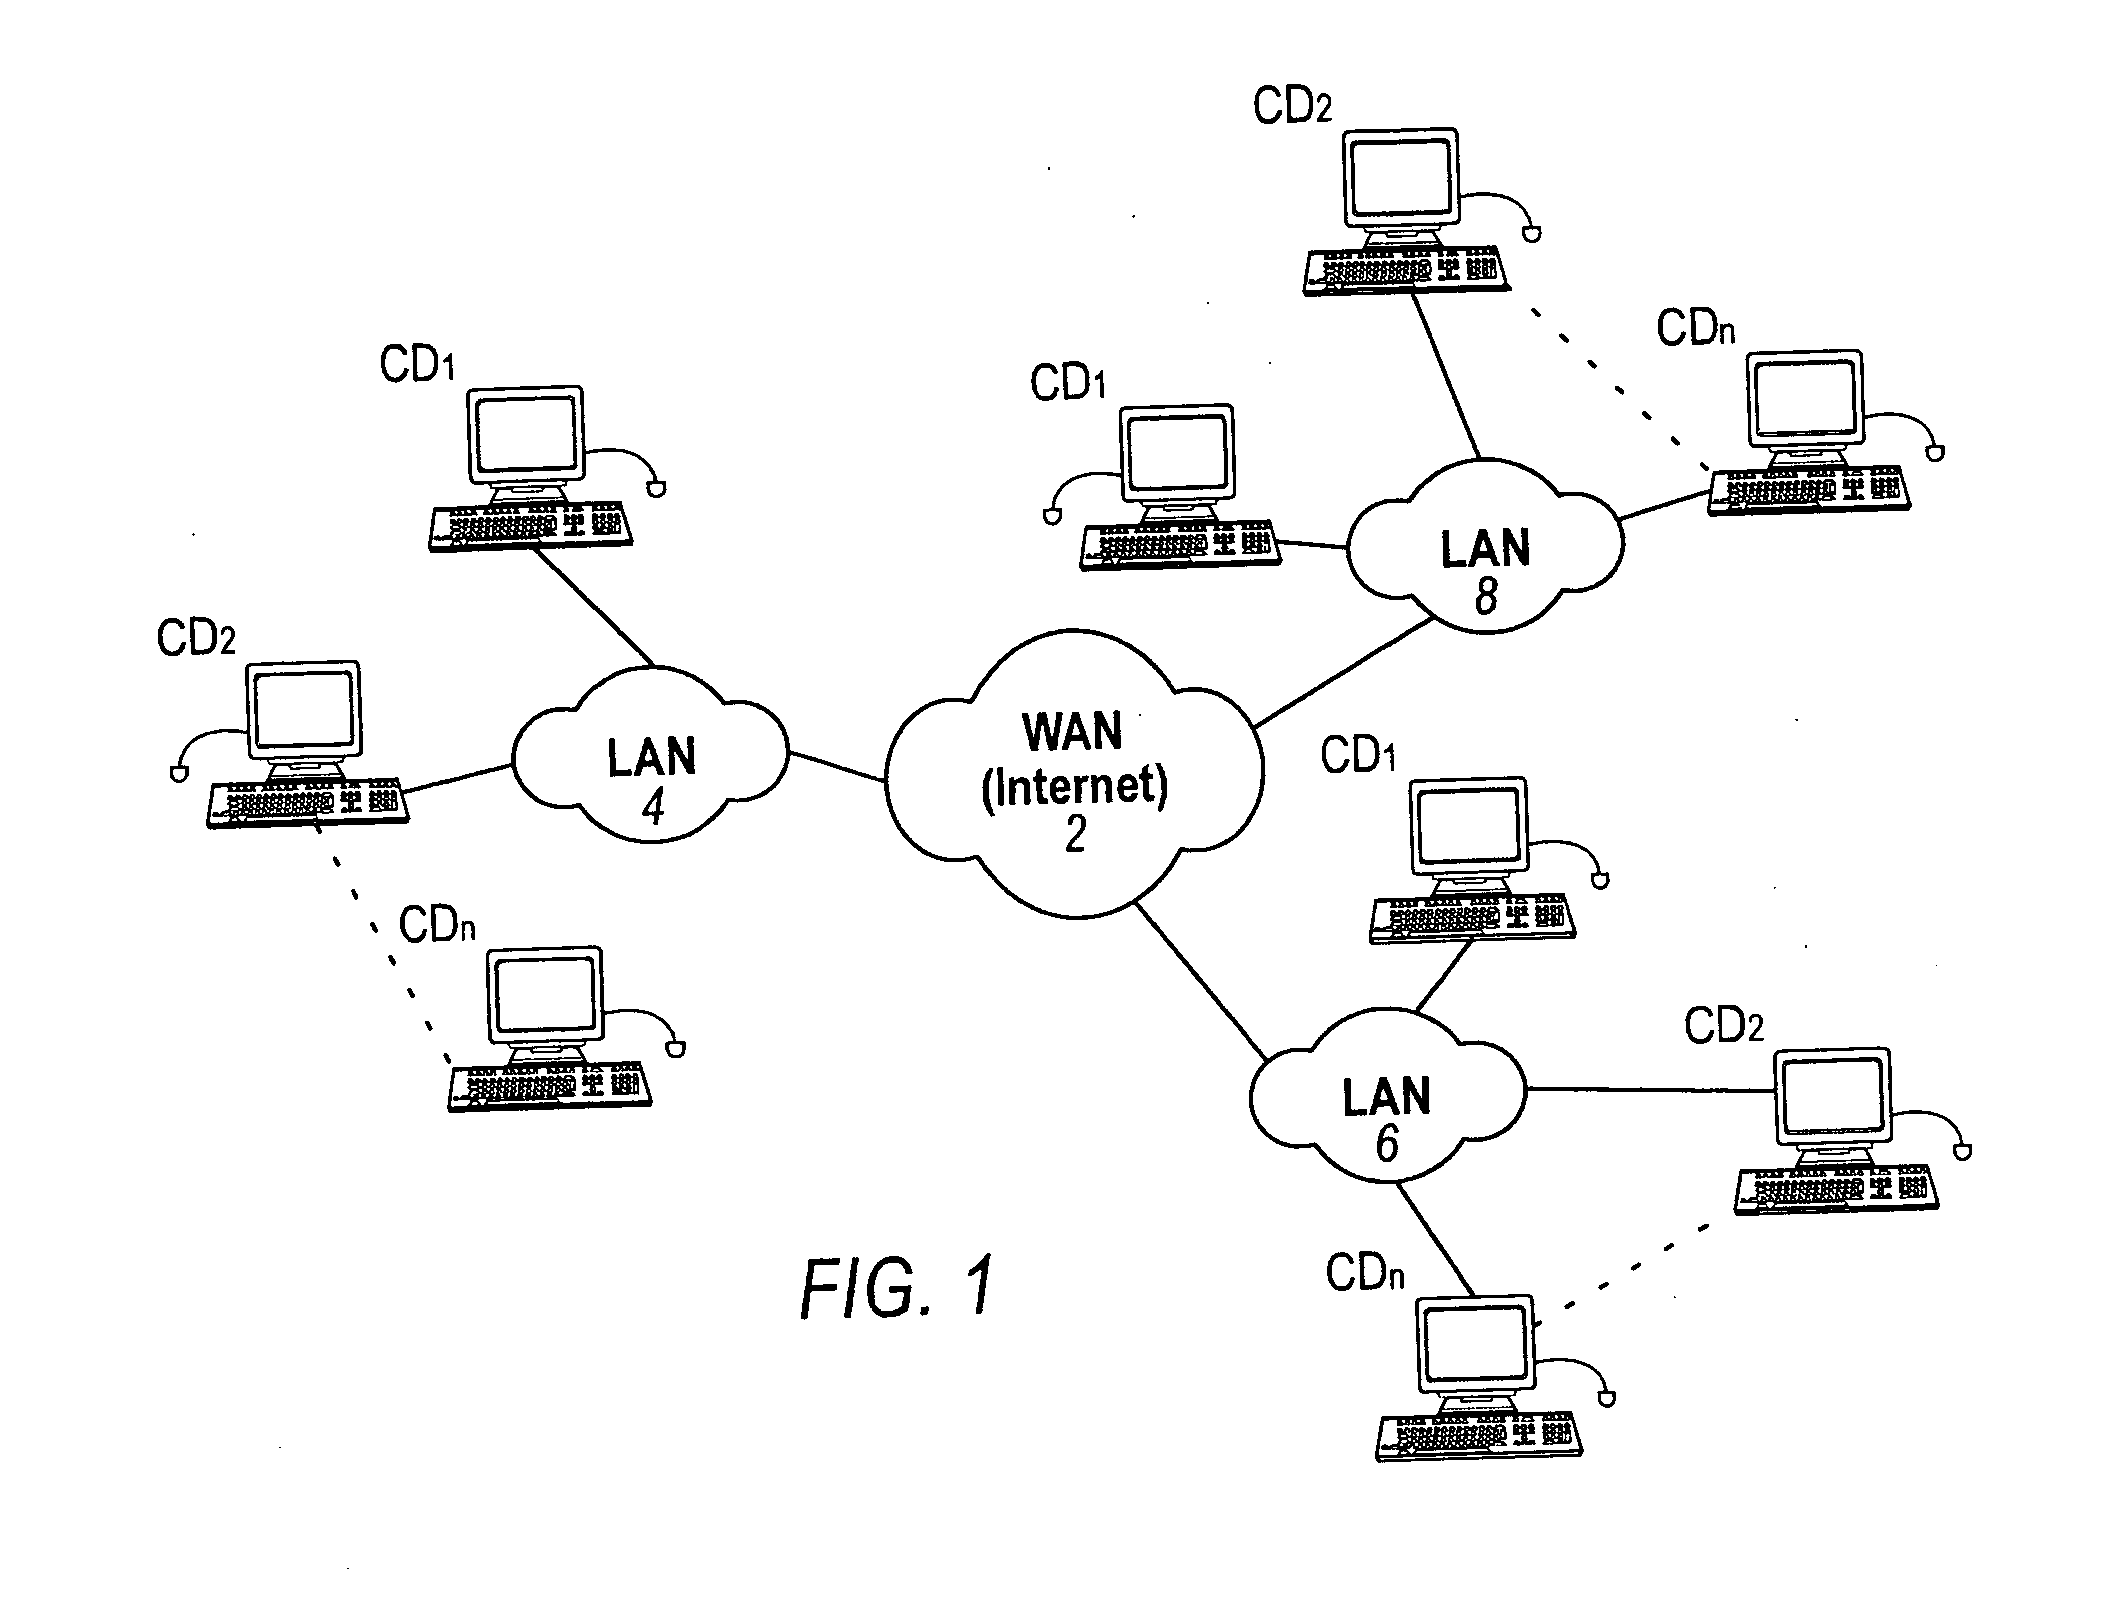 Secure flow control for a data flow in a computer and data flow in a computer network